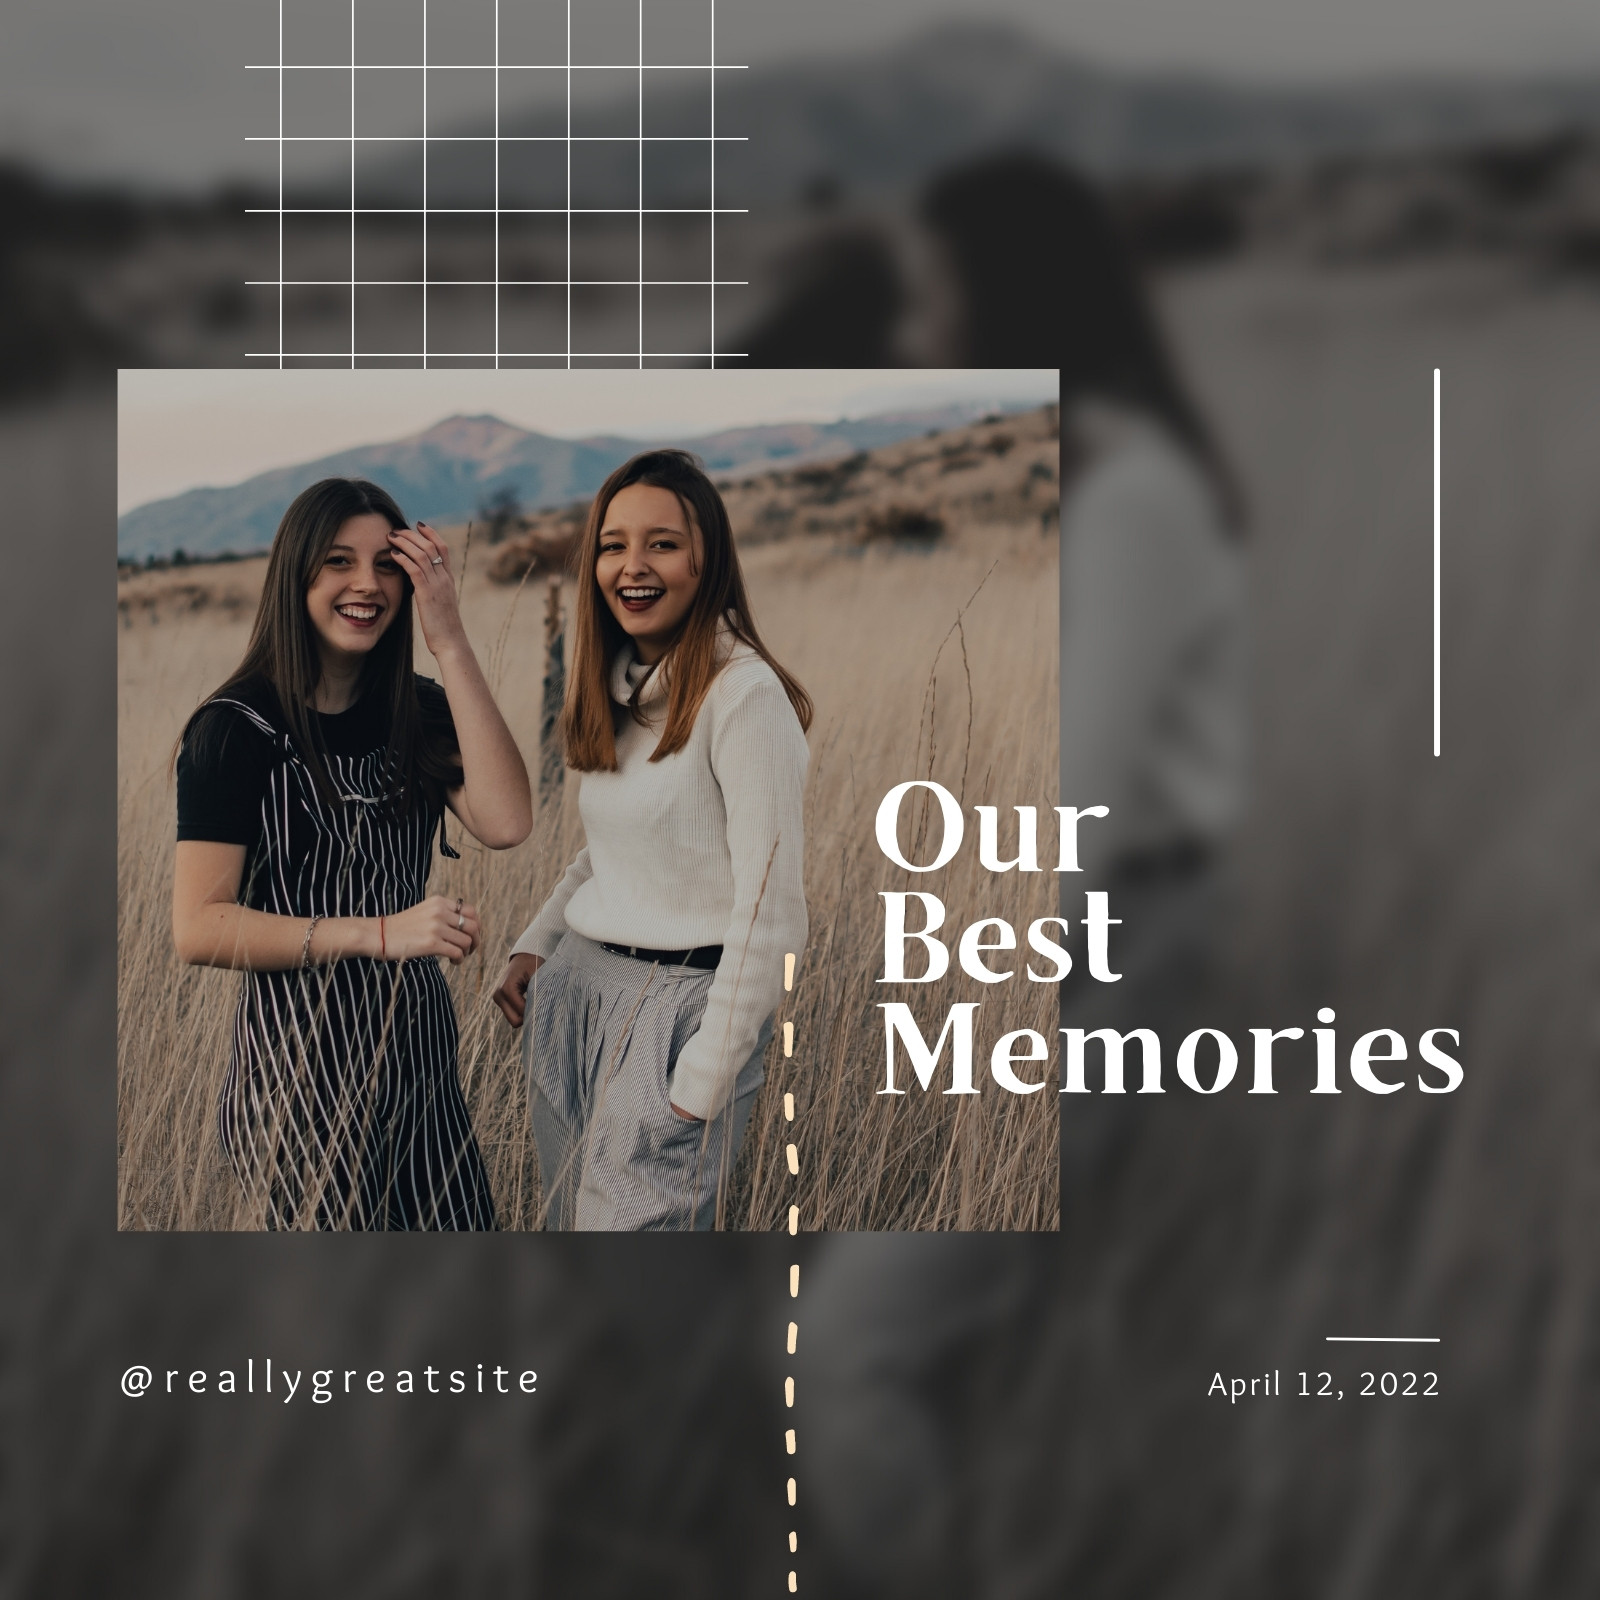 Free and customizable best friend templates